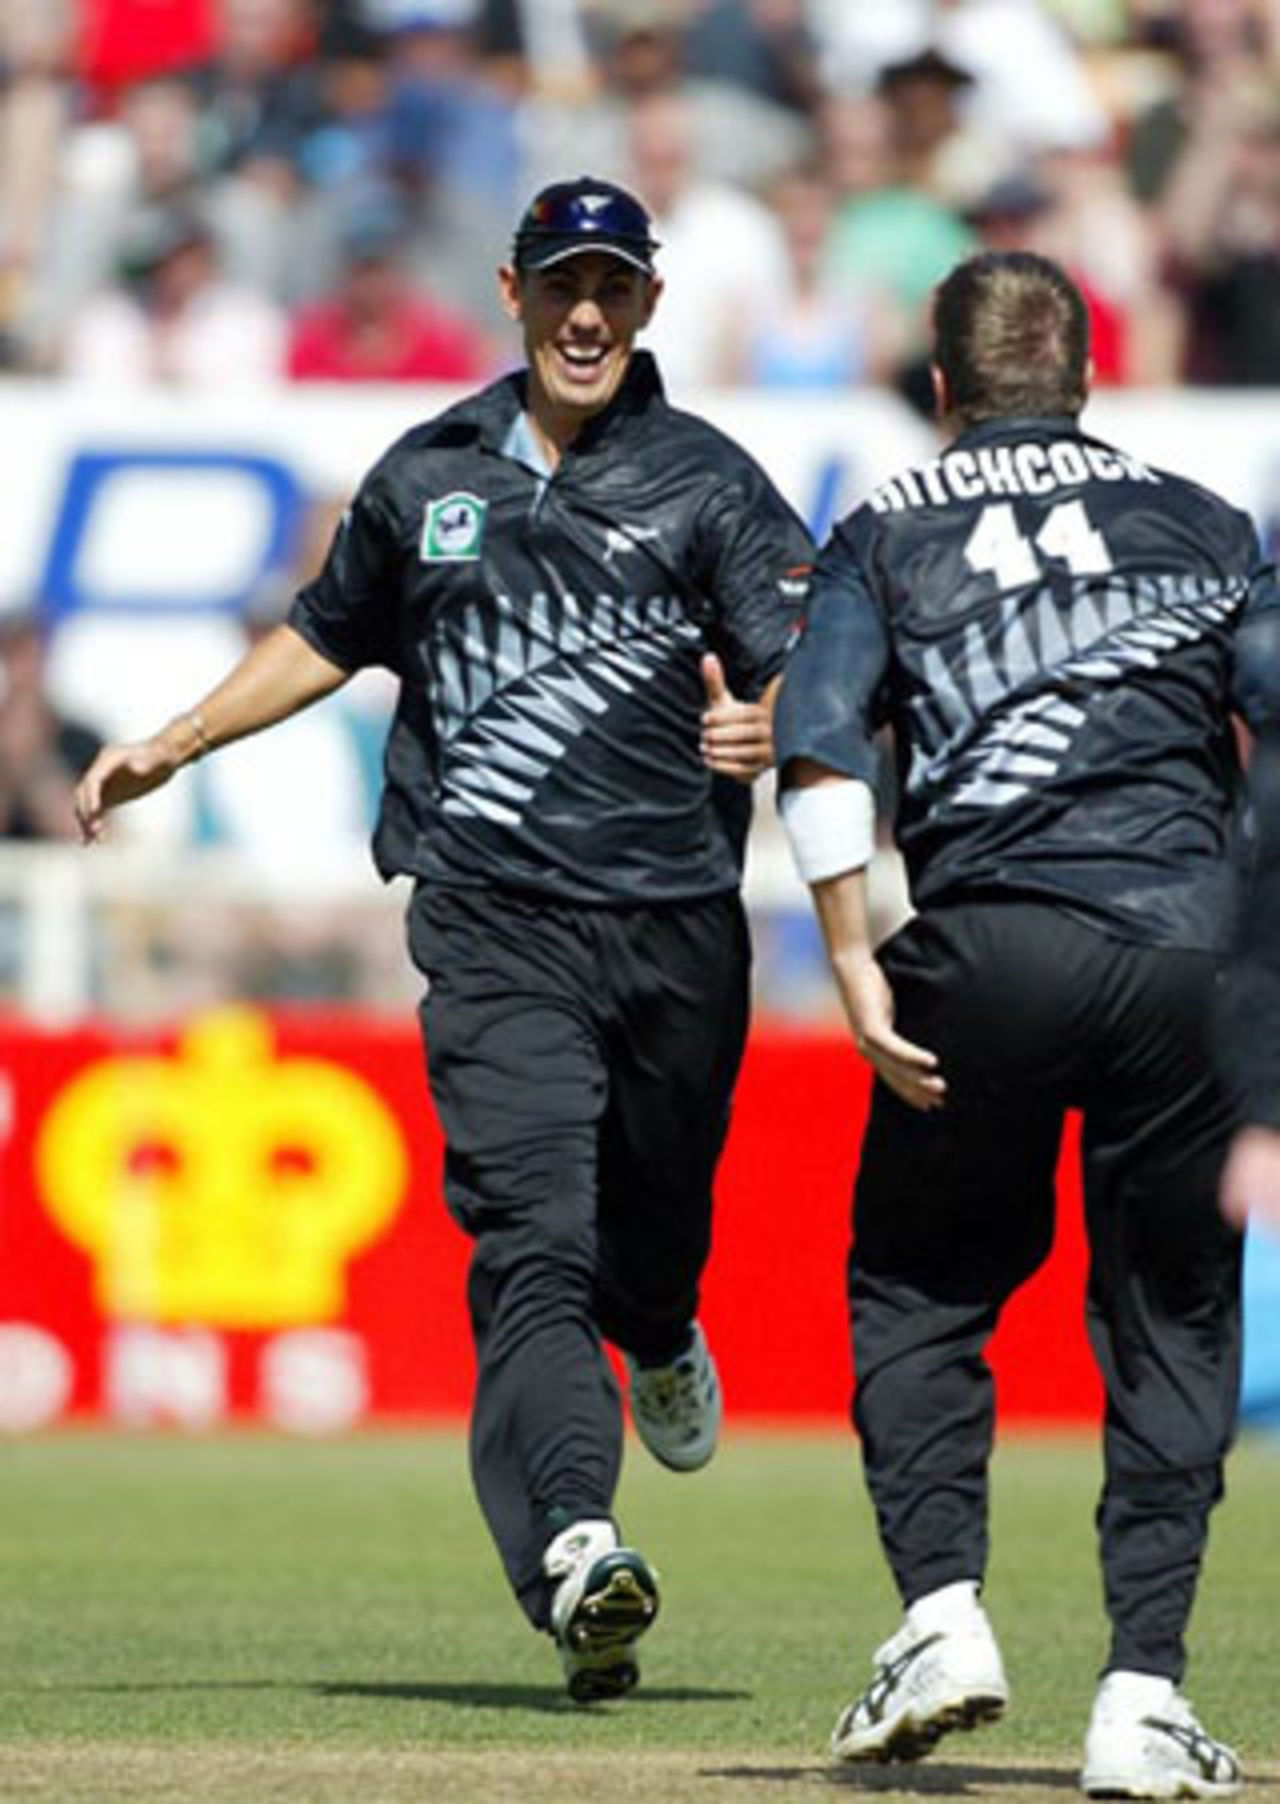 New Zealand players Mathew Sinclair (left) and Paul Hitchcock celebrate the dismissal of Indian batsman Yuvraj Singh, run out by Hitchcock for 12. 3rd ODI: New Zealand v India at Jade Stadium, Christchurch, 1 January 2003.